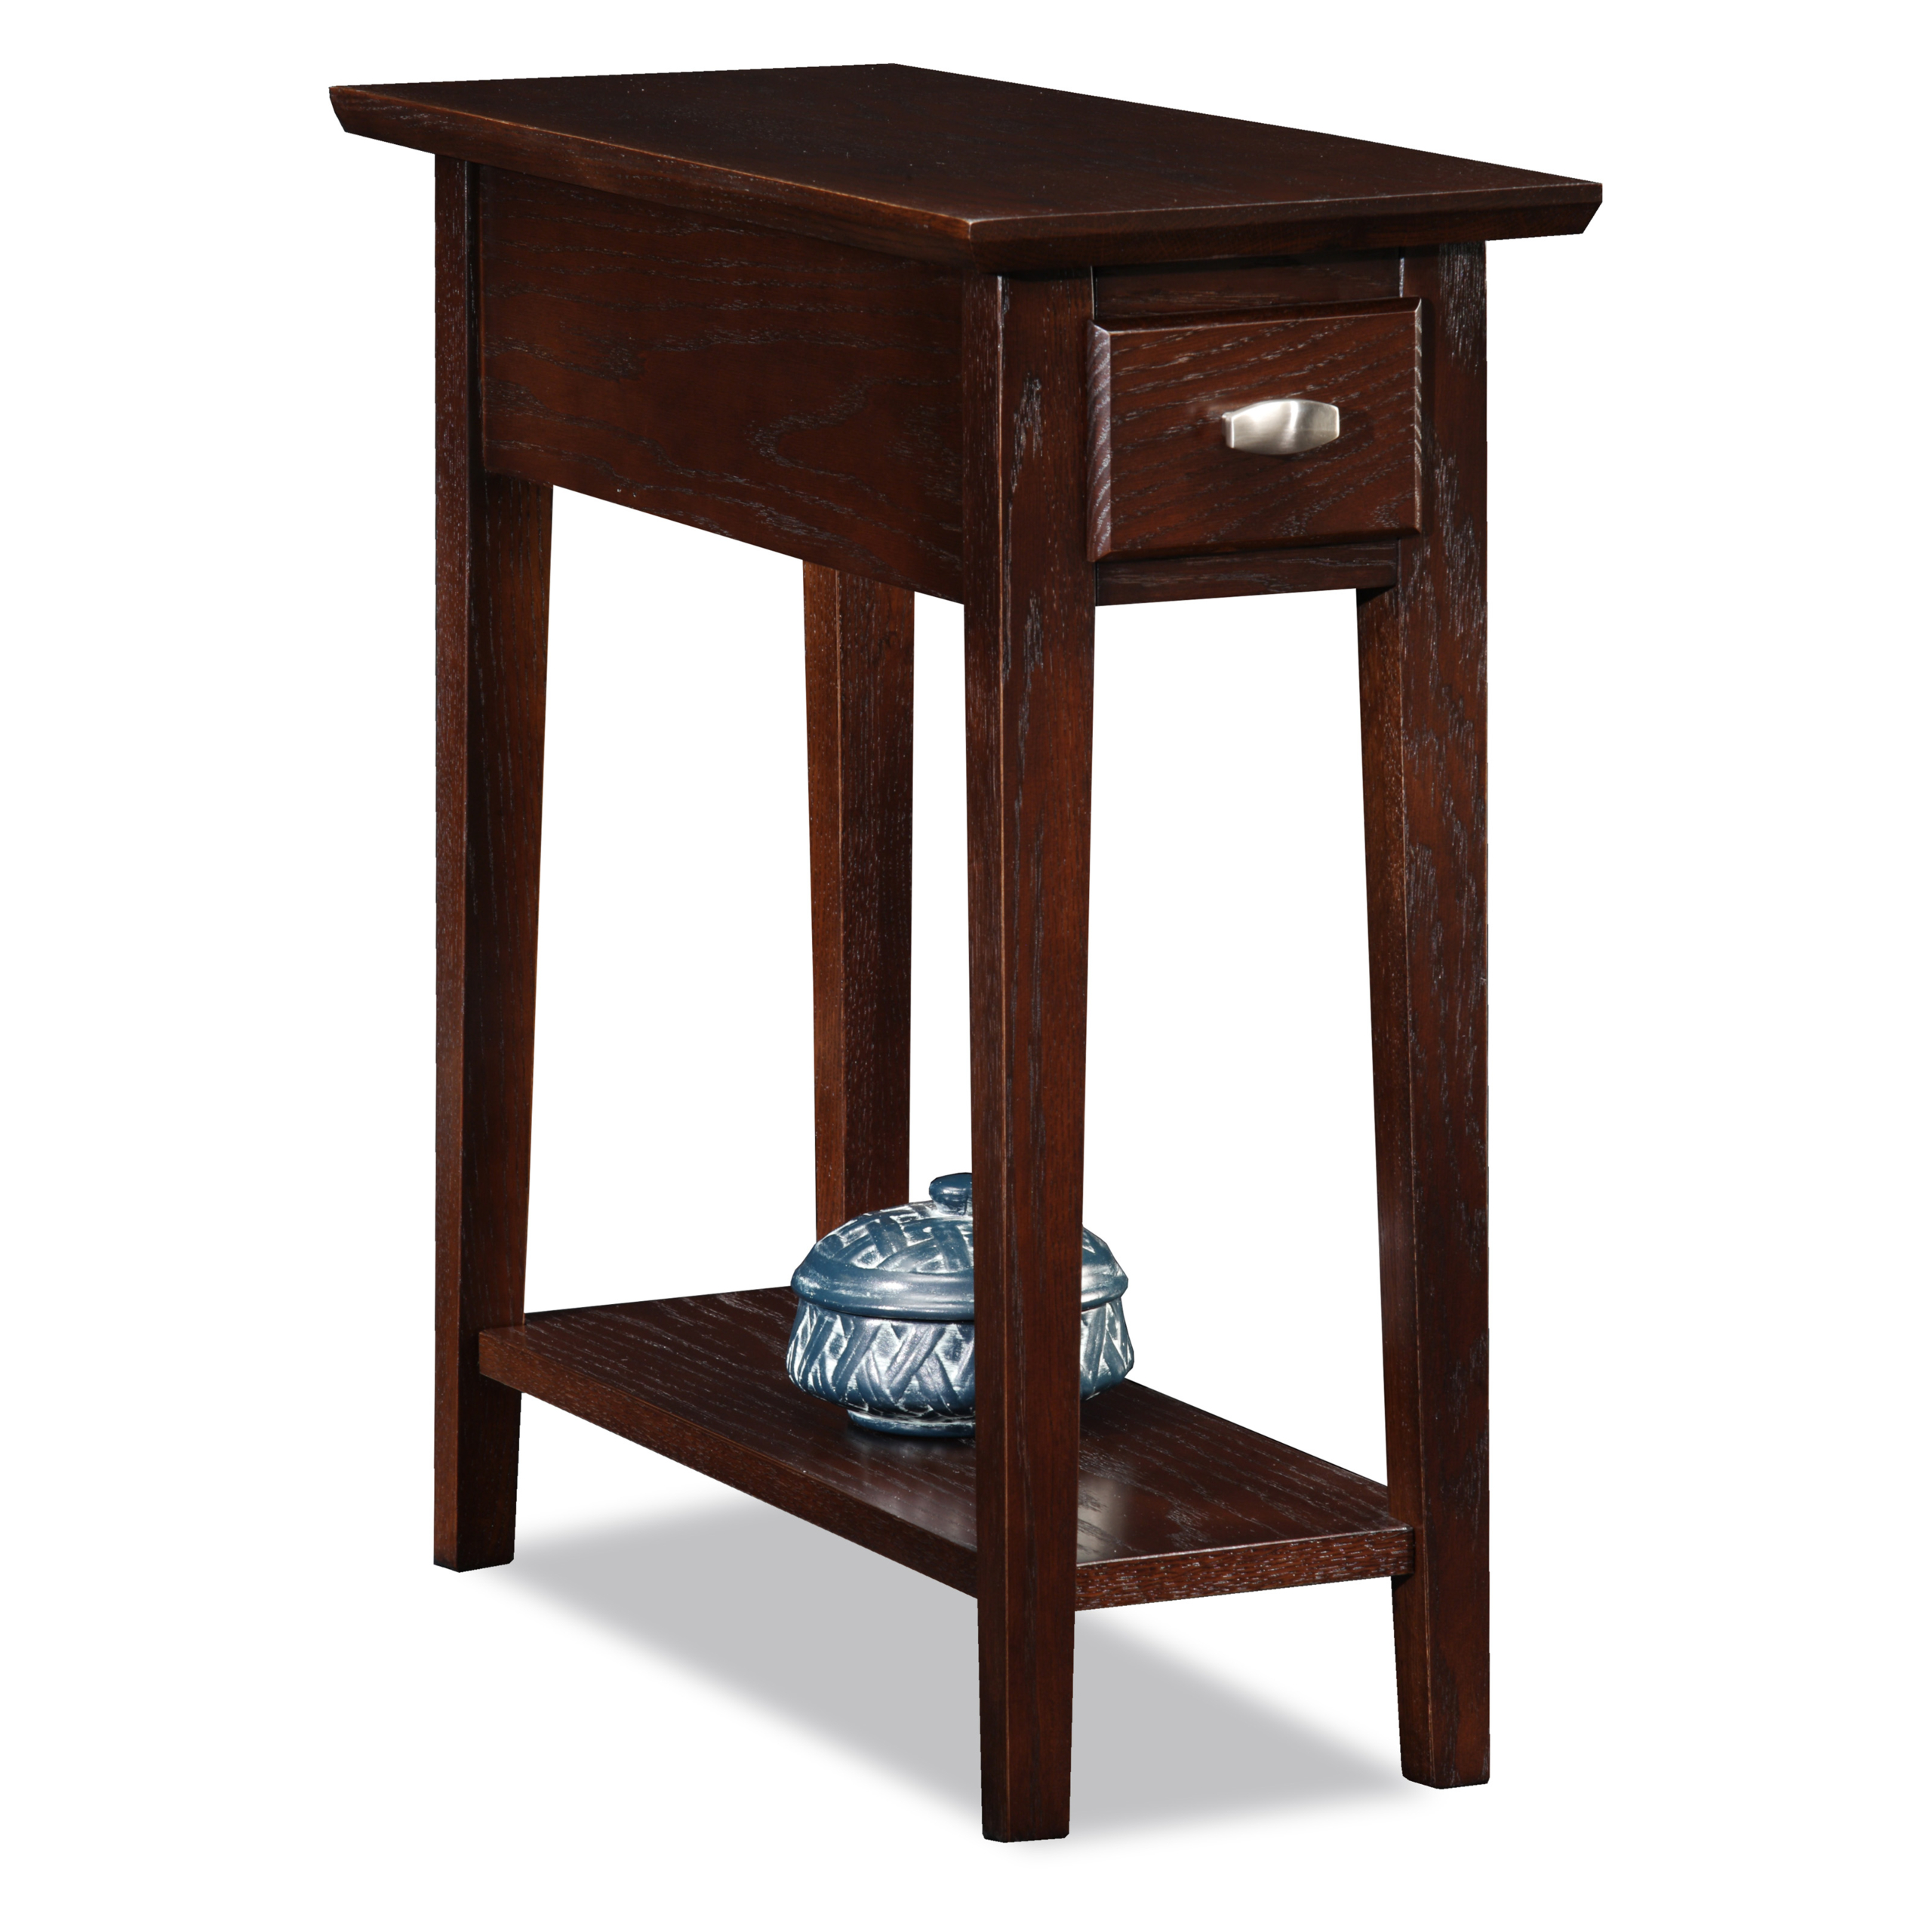 Glossy Chocolate Oak End Table with Storage